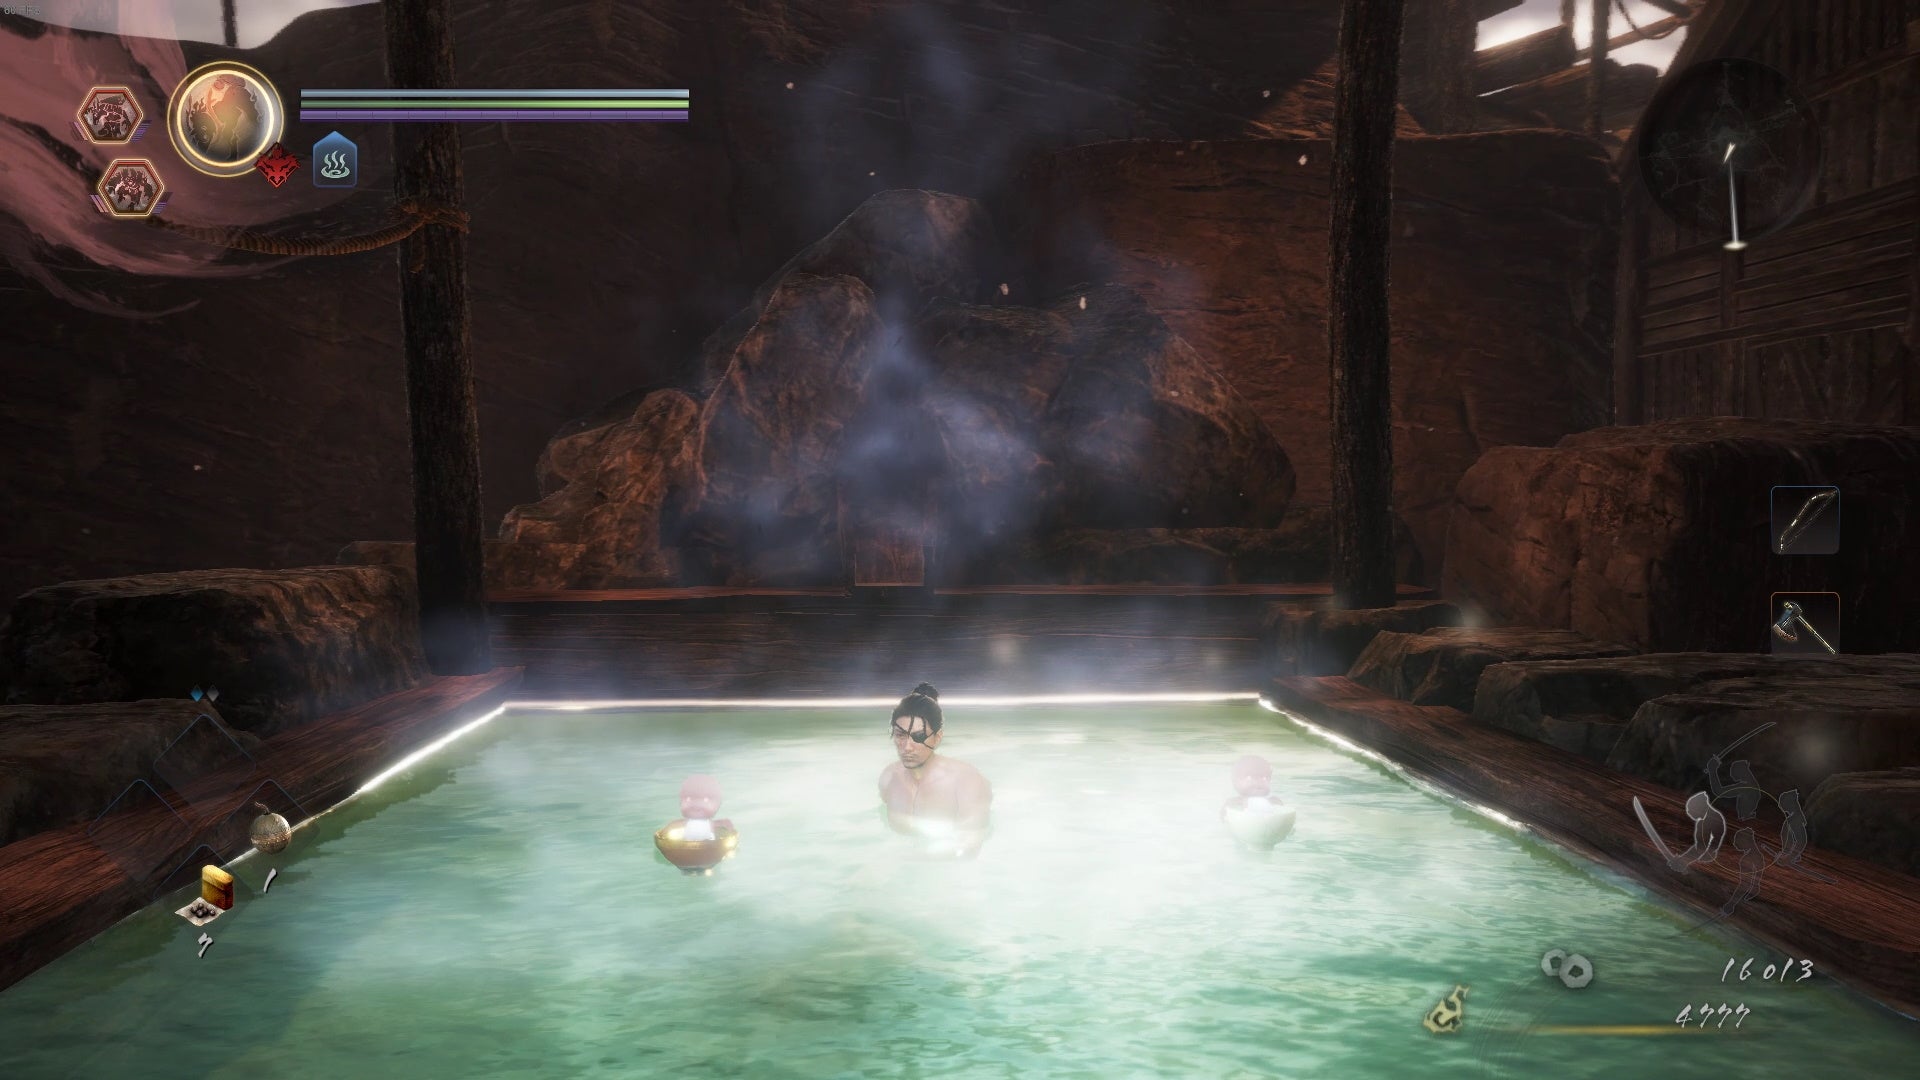 My character bathes in a hot spring. Two little kodama spirits relax in their bowls beside me.